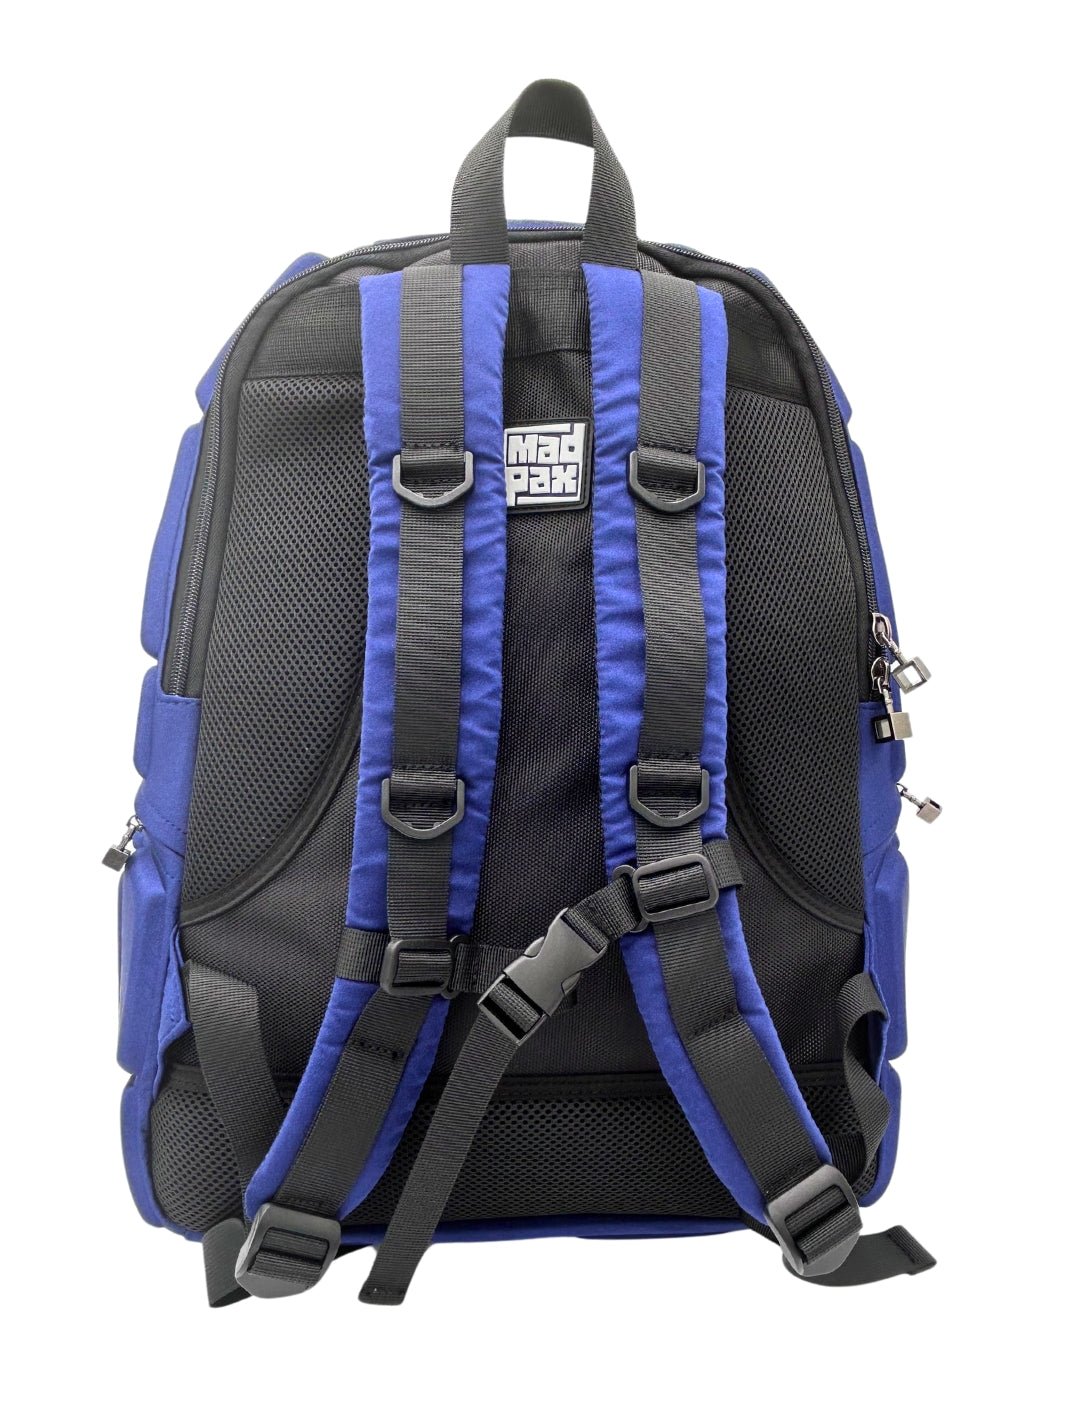 Back view of Wild Blue Yonder navy blue backpack - Madpax